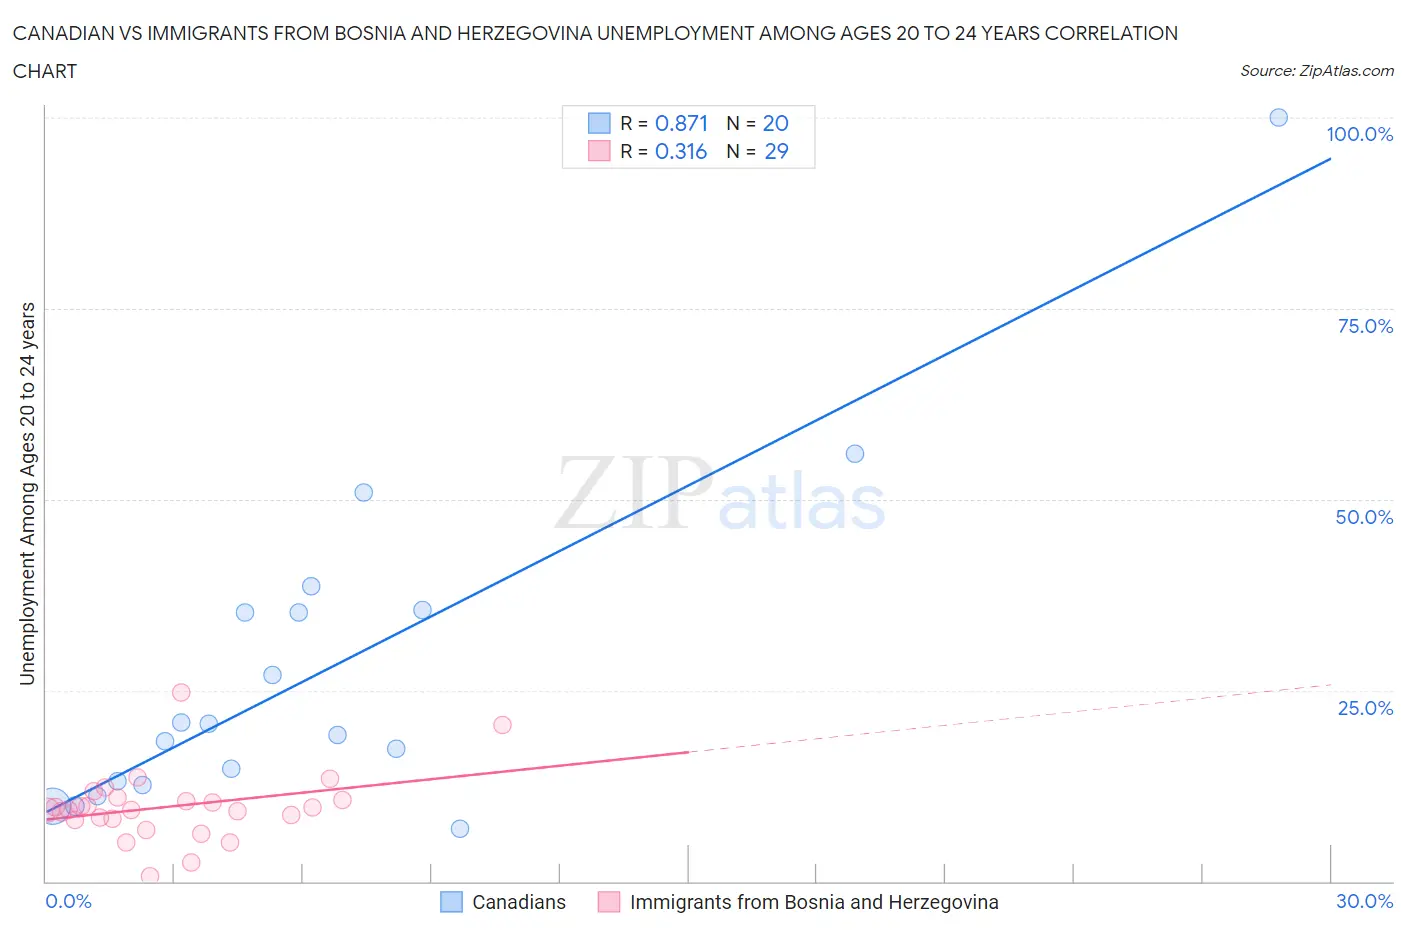 Canadian vs Immigrants from Bosnia and Herzegovina Unemployment Among Ages 20 to 24 years